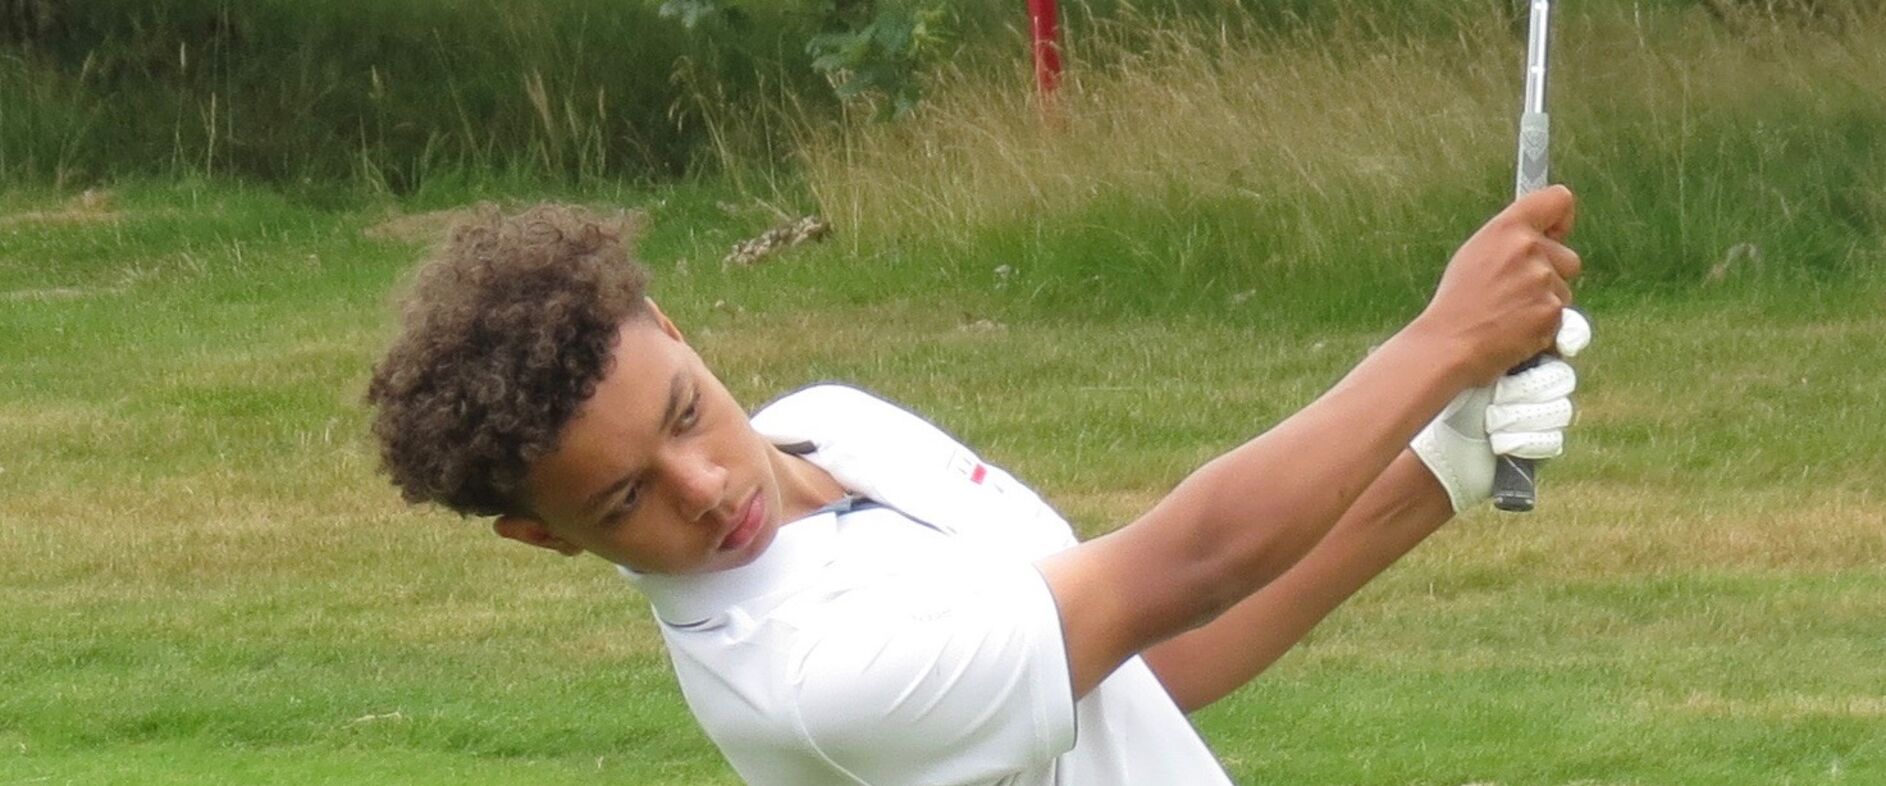 Congratulations to 15 yr old Cassius Blake (Kings Norton GC) wins the Boys Match Play Championship 2